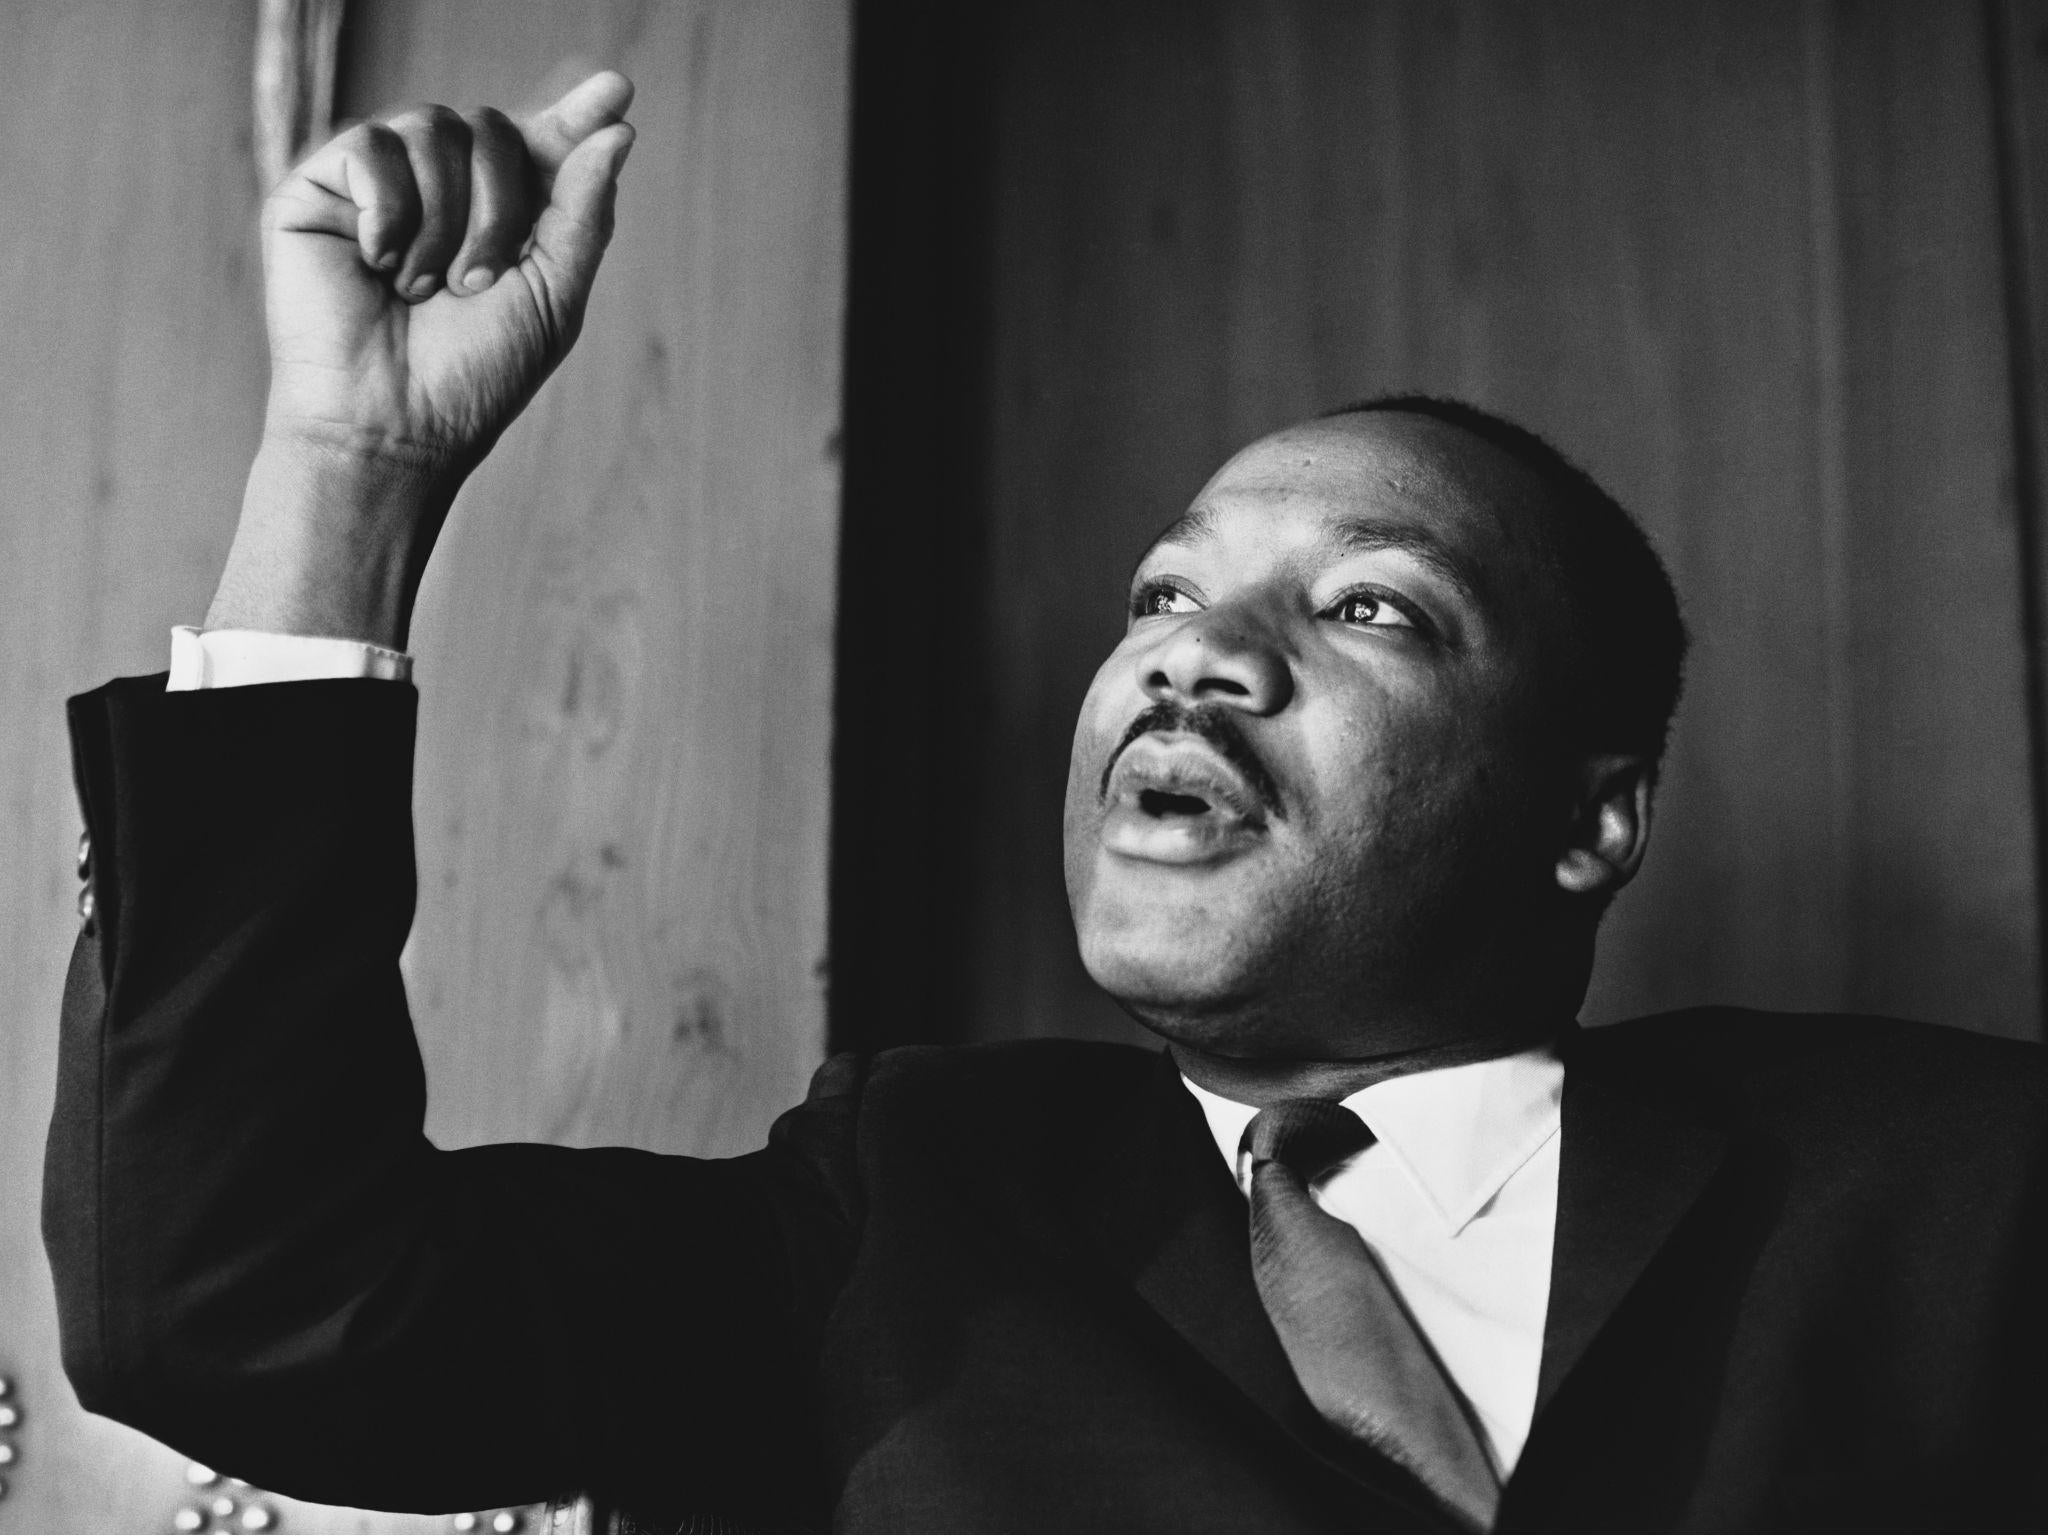 American civil rights leader Martin Luther King, Jr at a press conference in London, September 1964